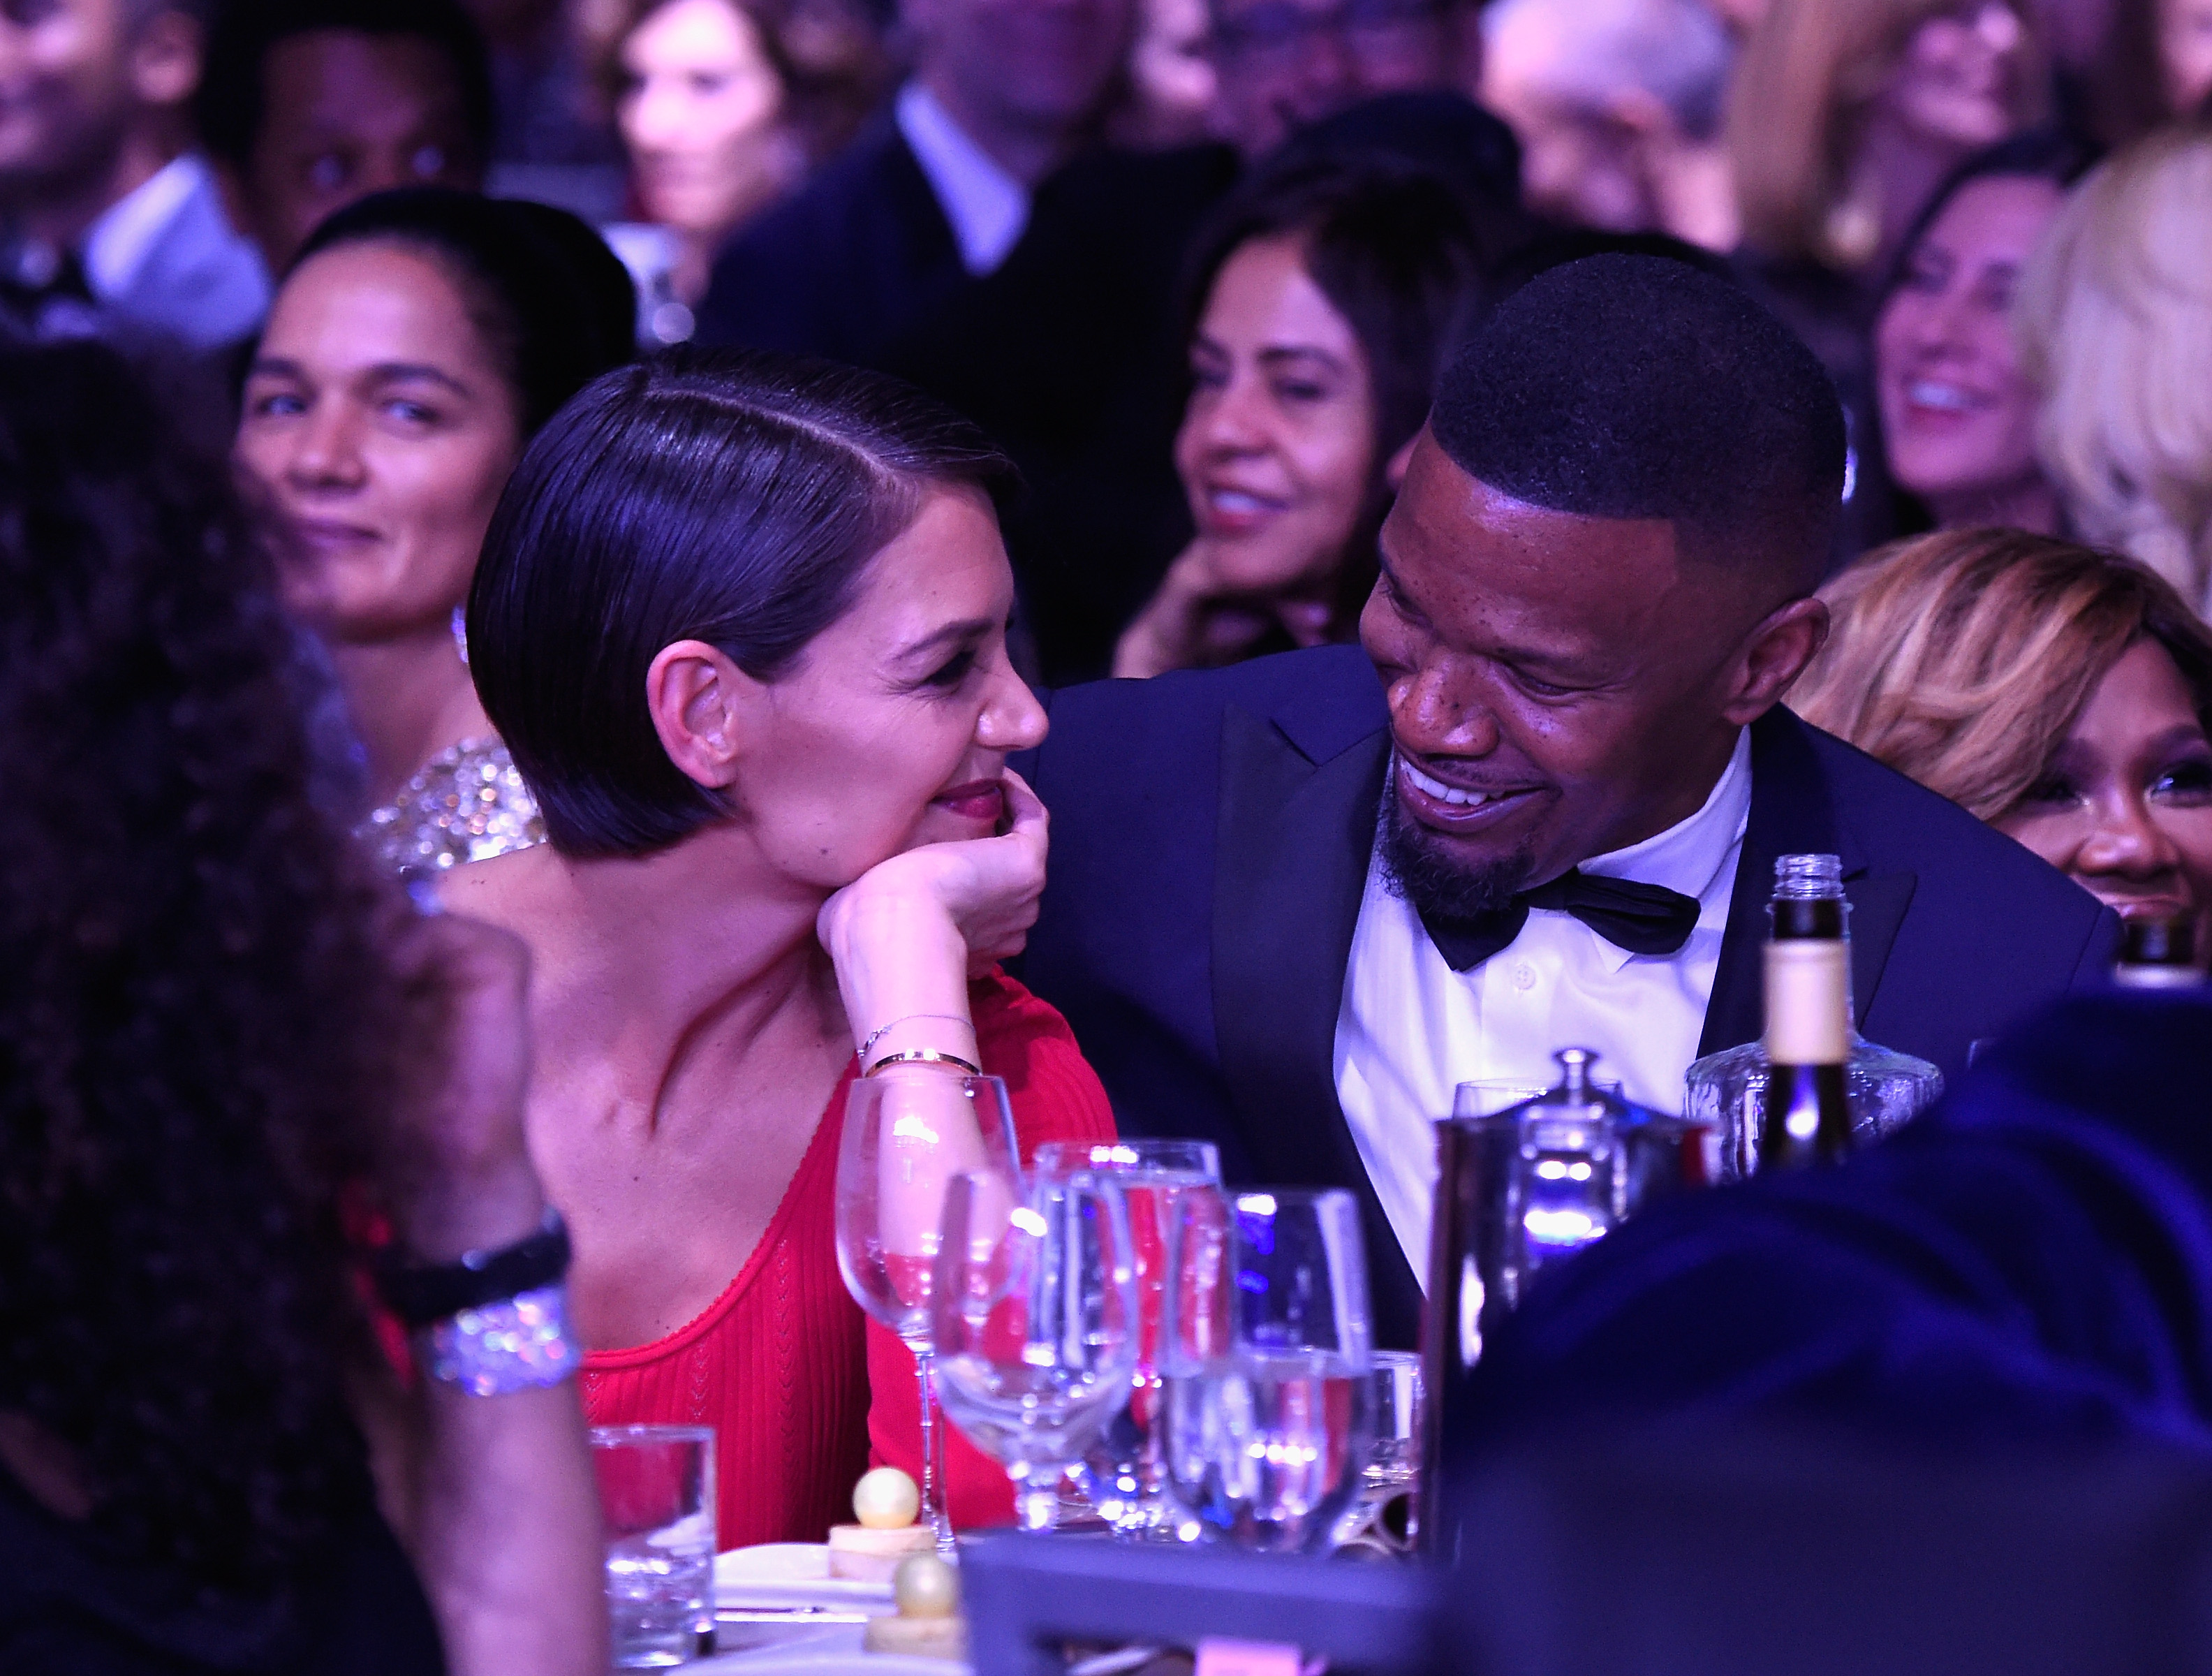 Katie Holmes and Jamie Foxx at the Clive Davis and Recording Academy Pre-Grammy Gala in New York City, 2018 | Source: Getty Images